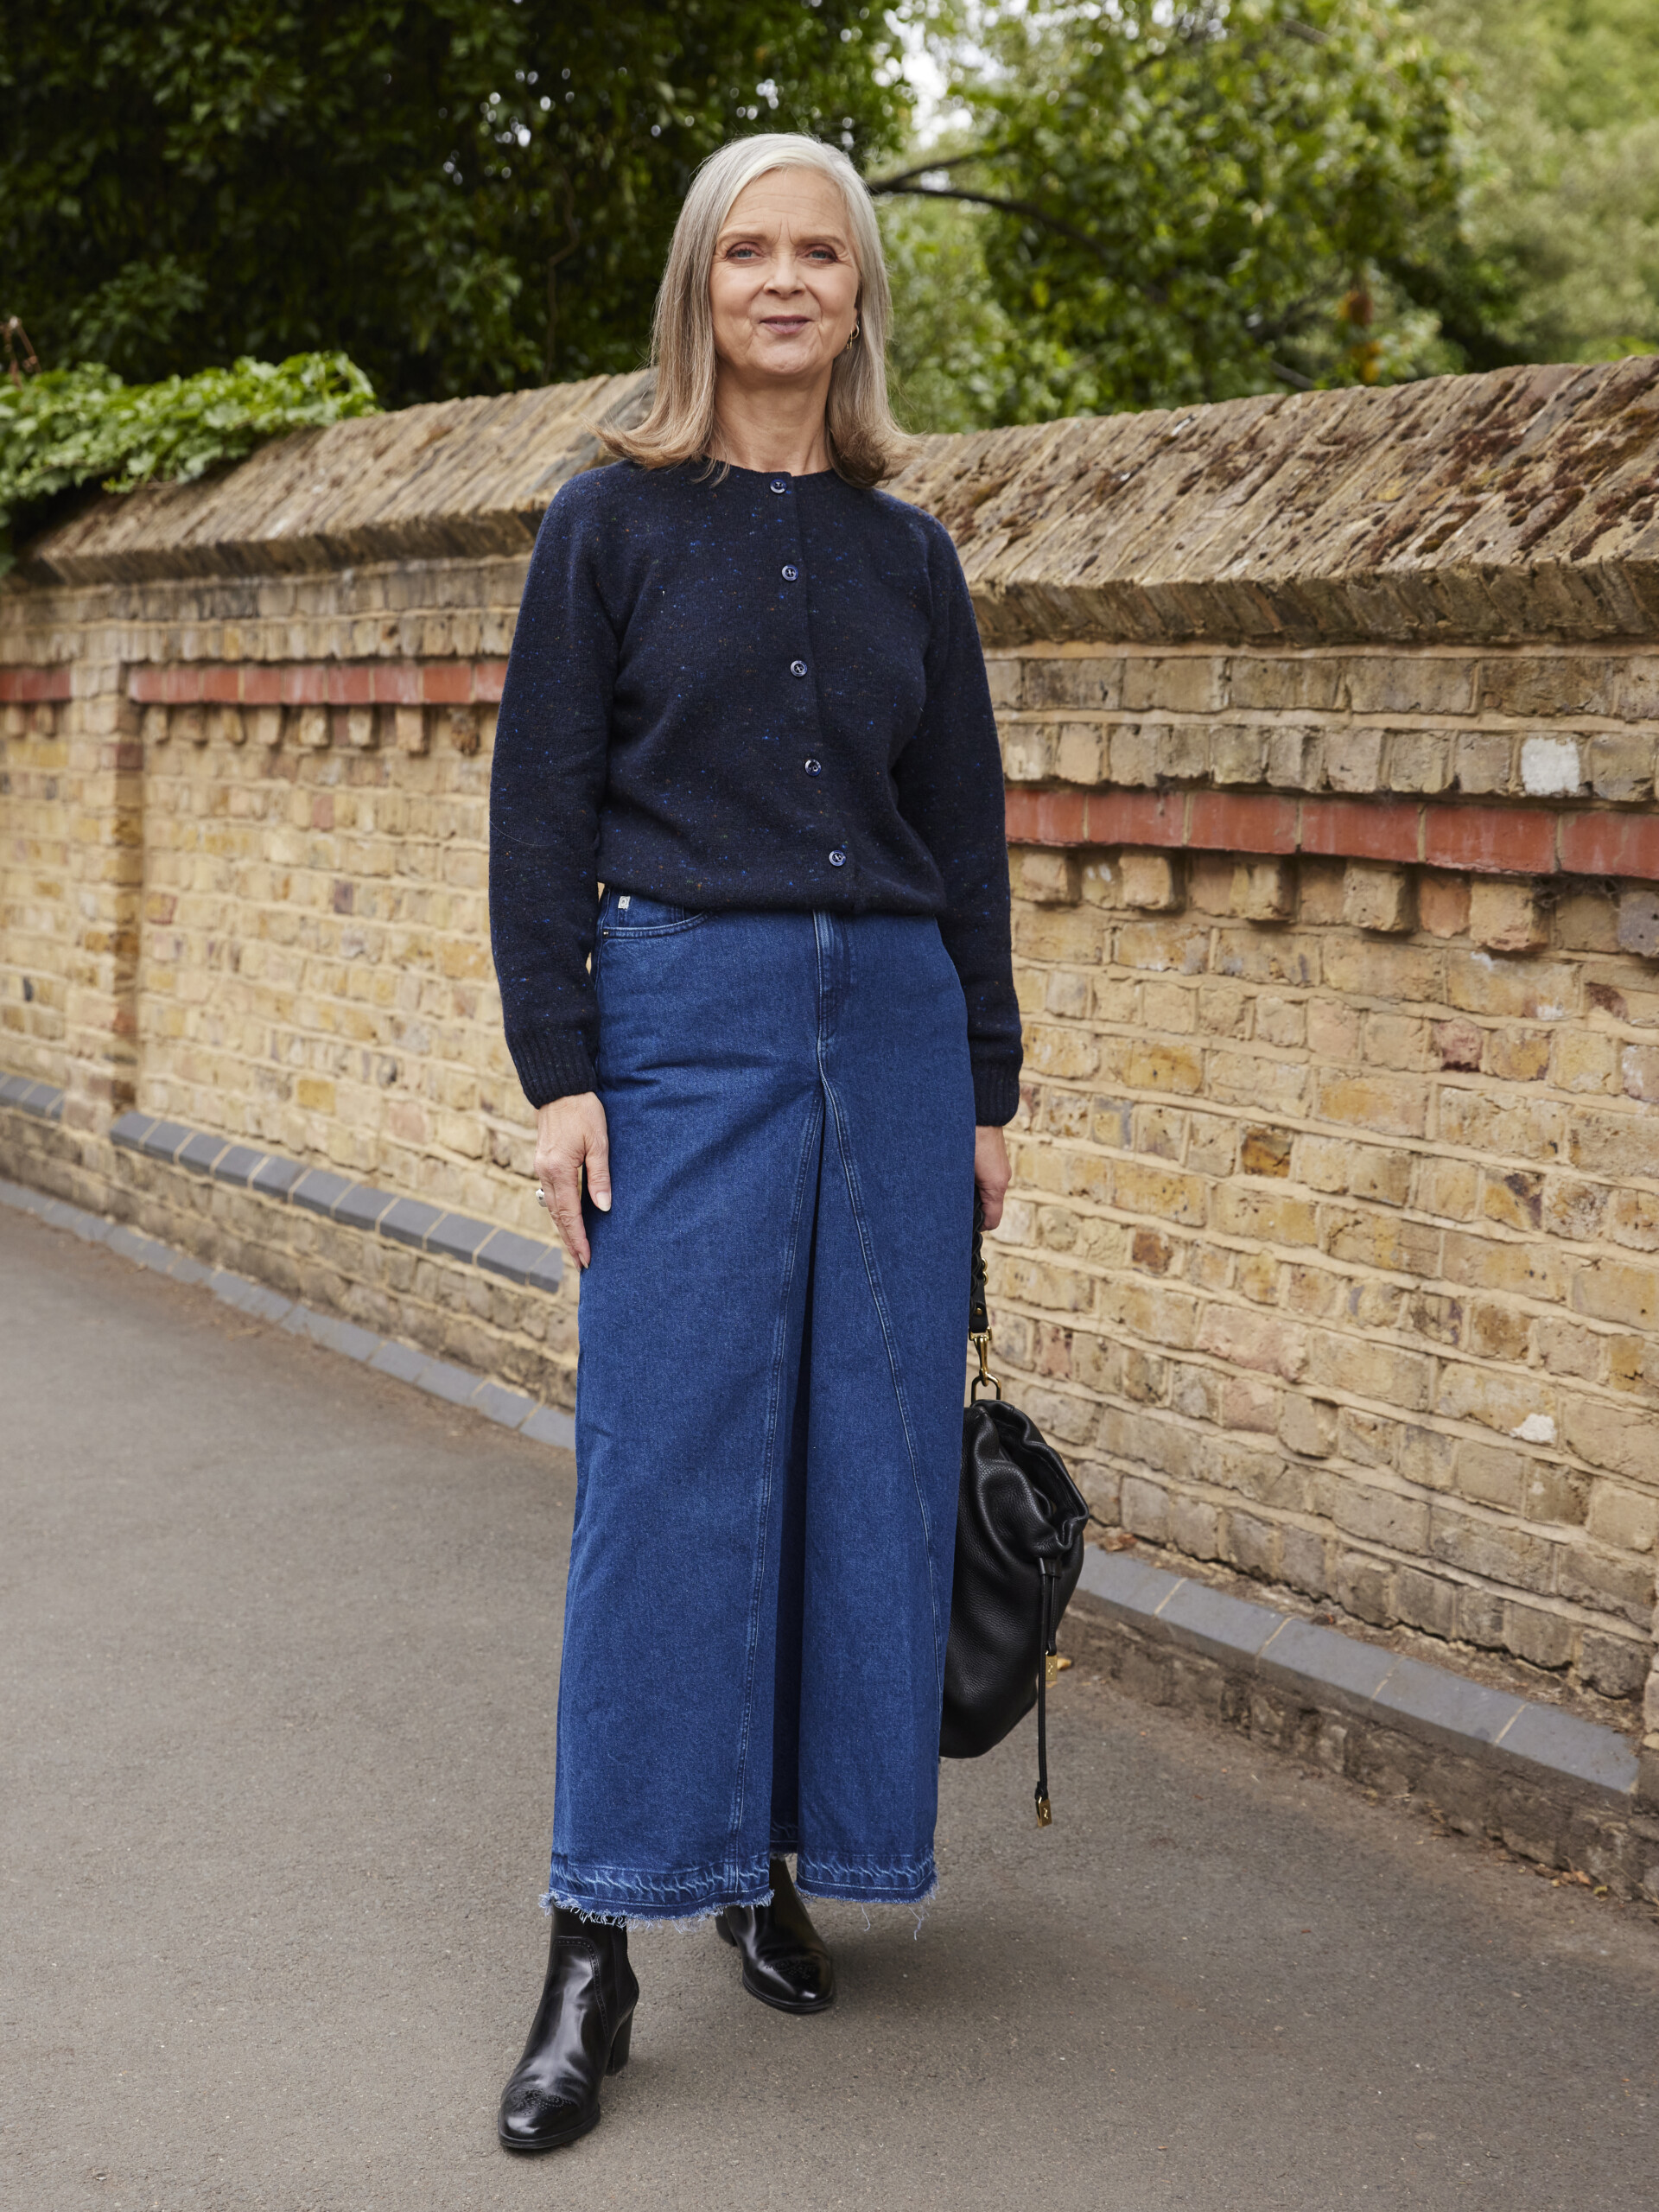 Denim maxi skirts are everywhere - but can you walk in them